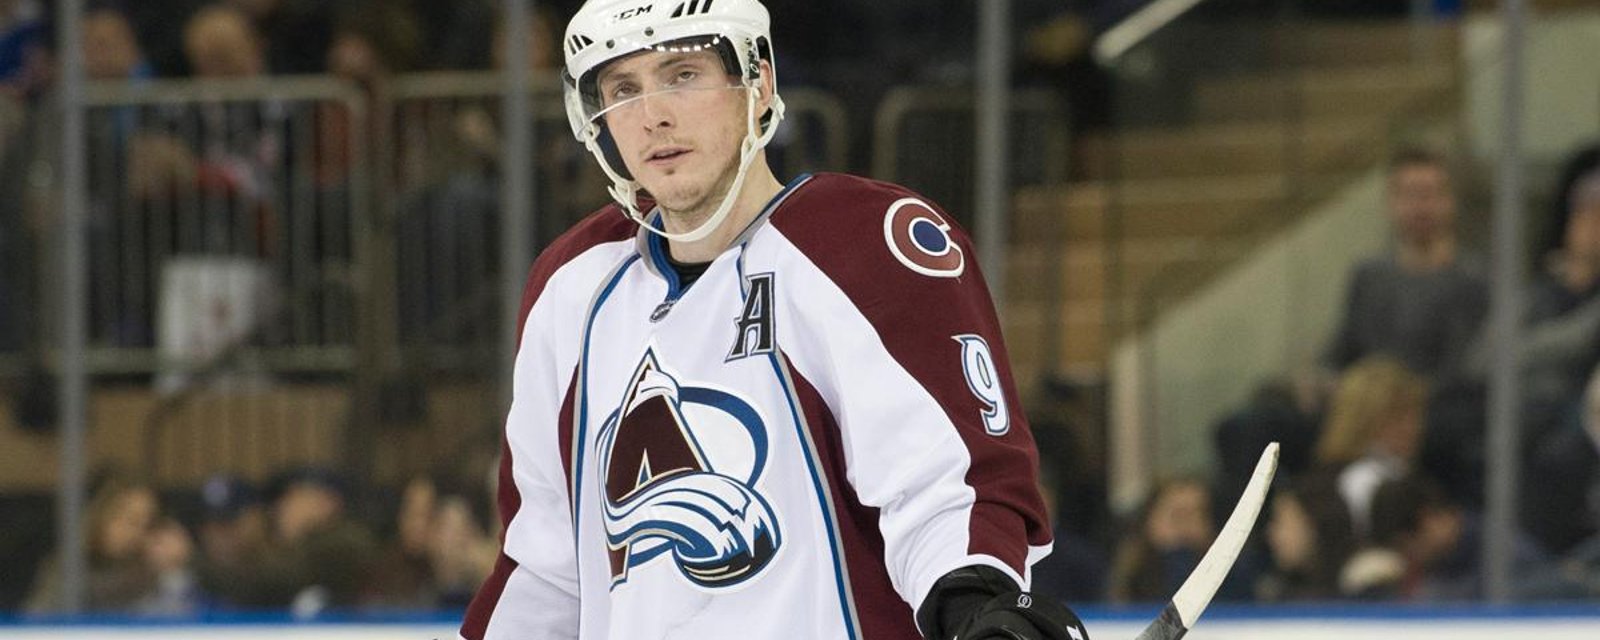 Crazy Duchene deal fell through (again) and he's now pissed. 